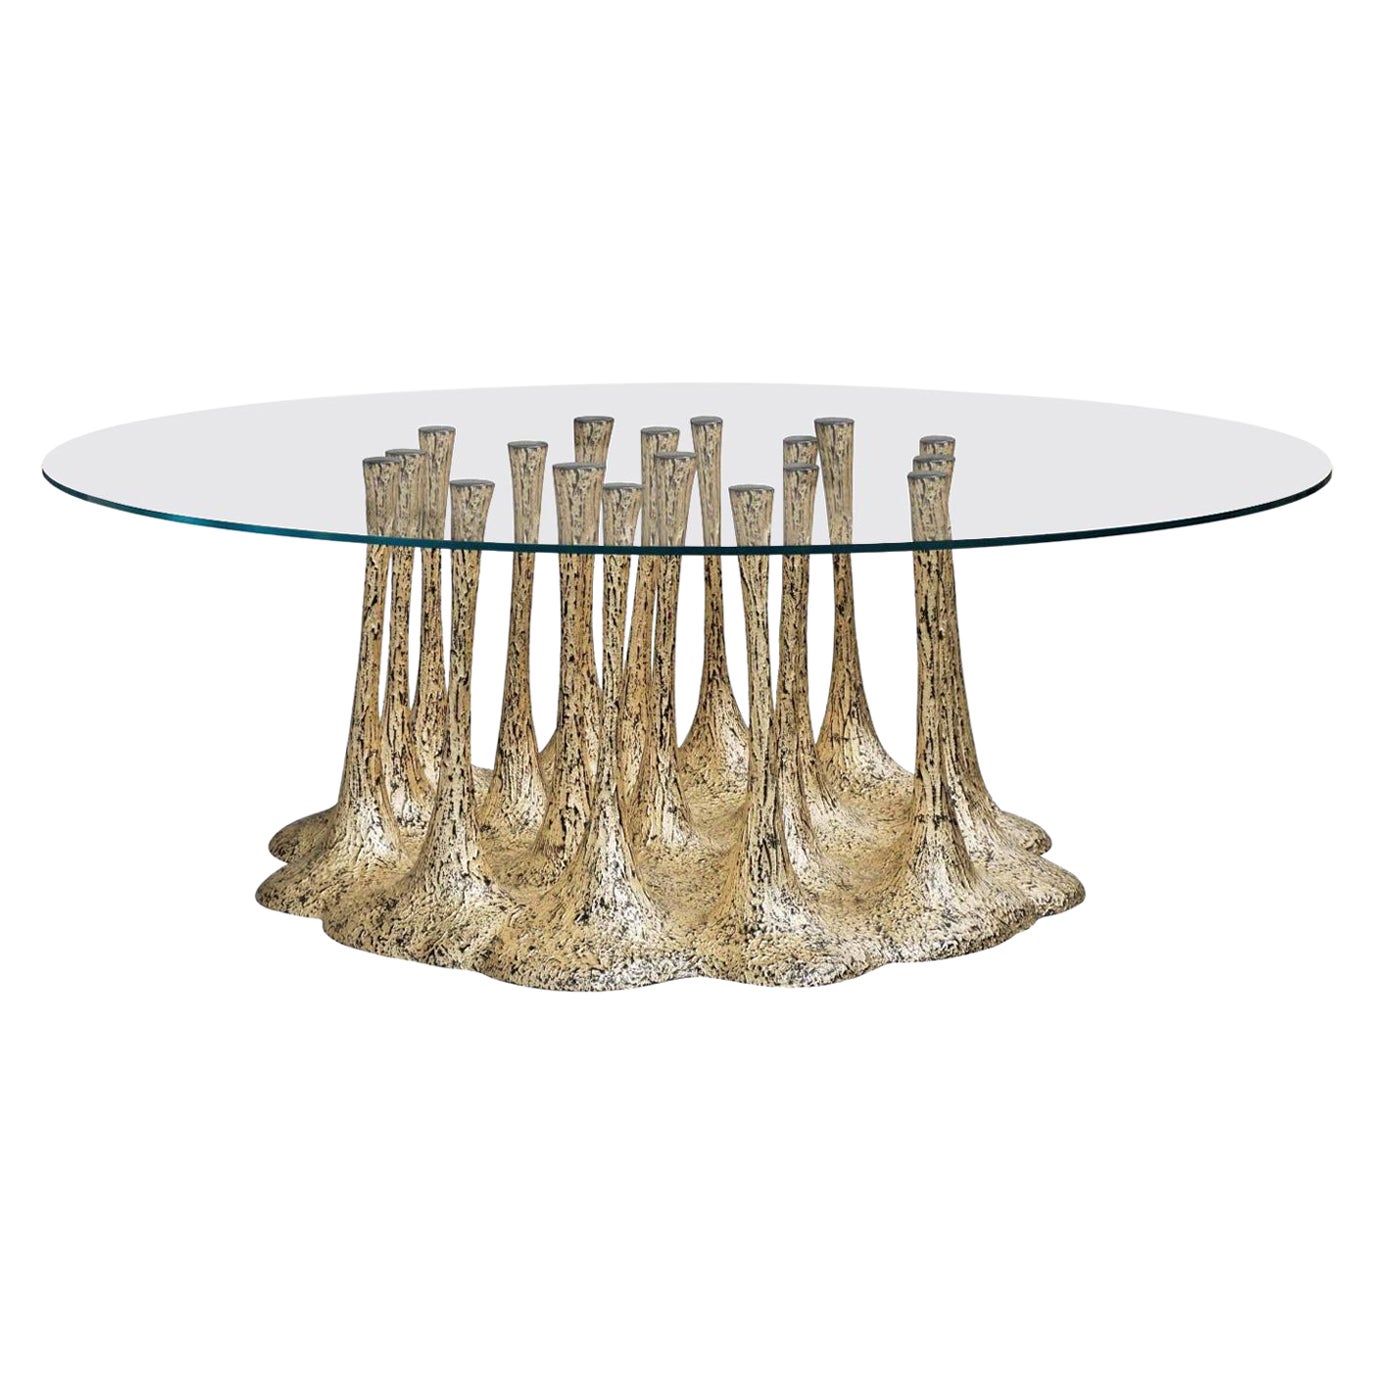 New Design Dining Table Glass and Fiberglass Finished in Gold Leaf 8/10 Persons